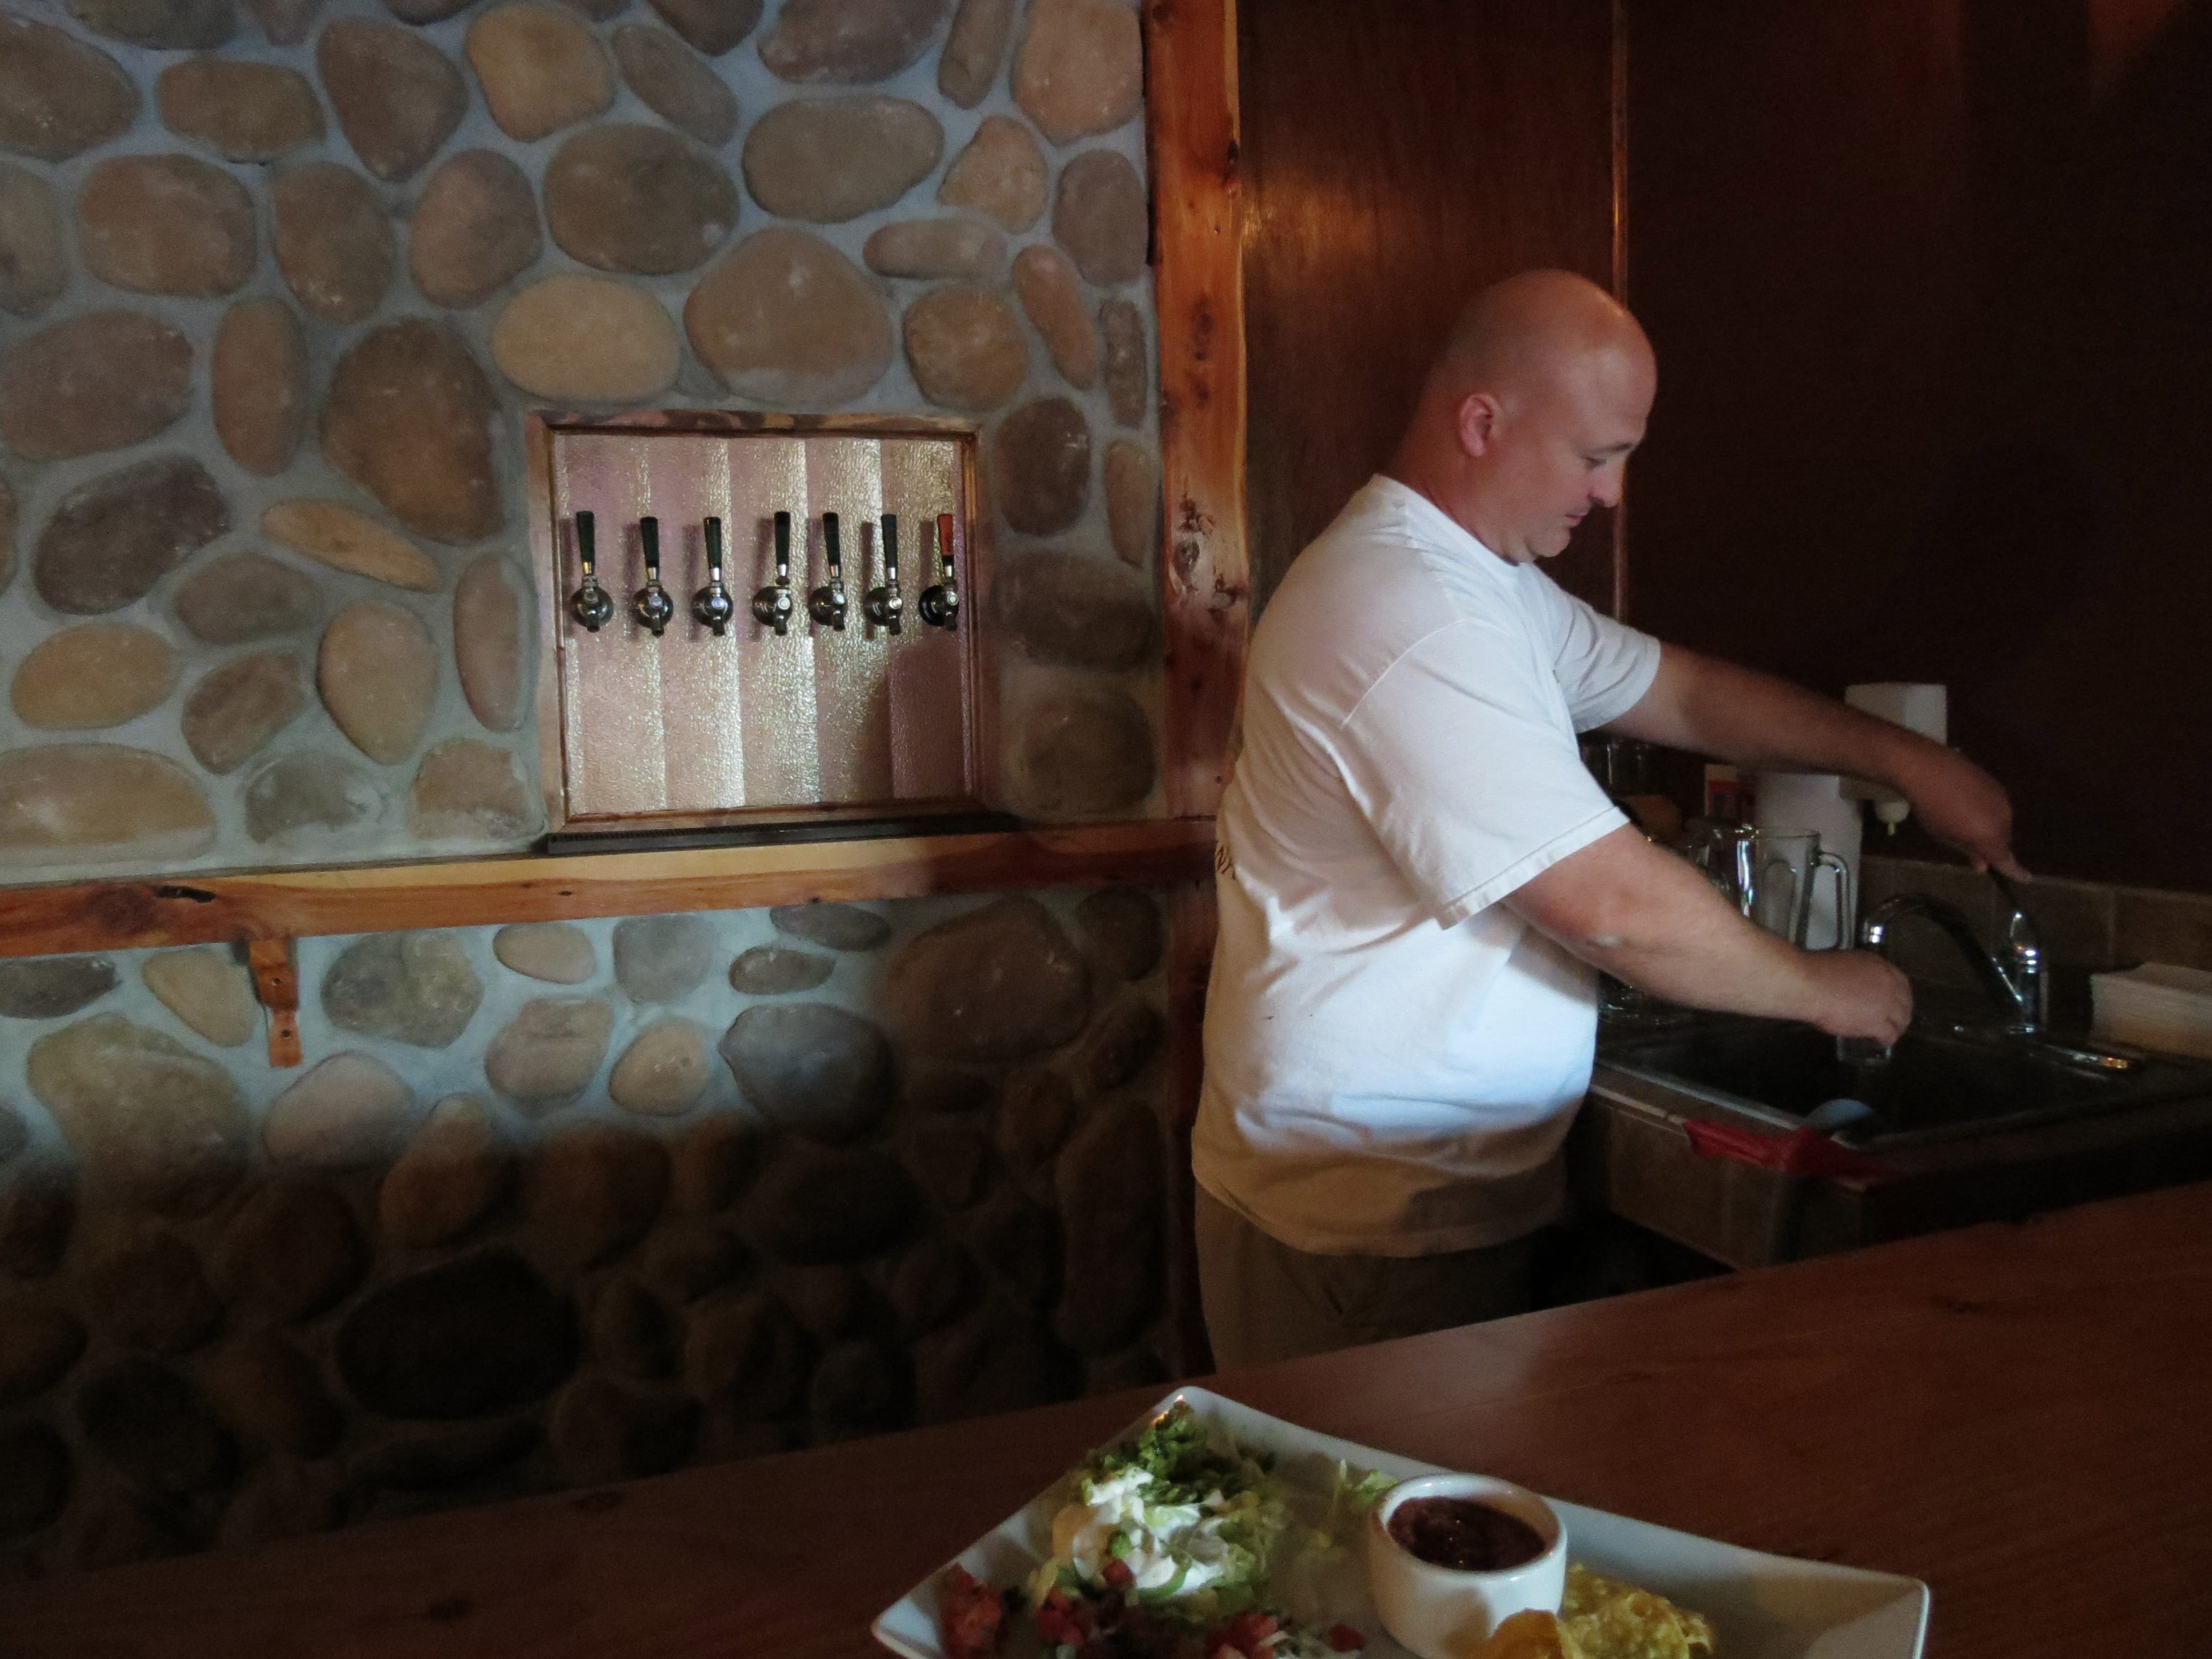 Mike Davis recently opened Rail Side Brewing in Washougal. The pub serves European style beers and offers a menu of delicacies including Polish green cabbage salad and a selection of pizzas. The brewery will host an Oktober Fest party Friday through Sunday, Sept.